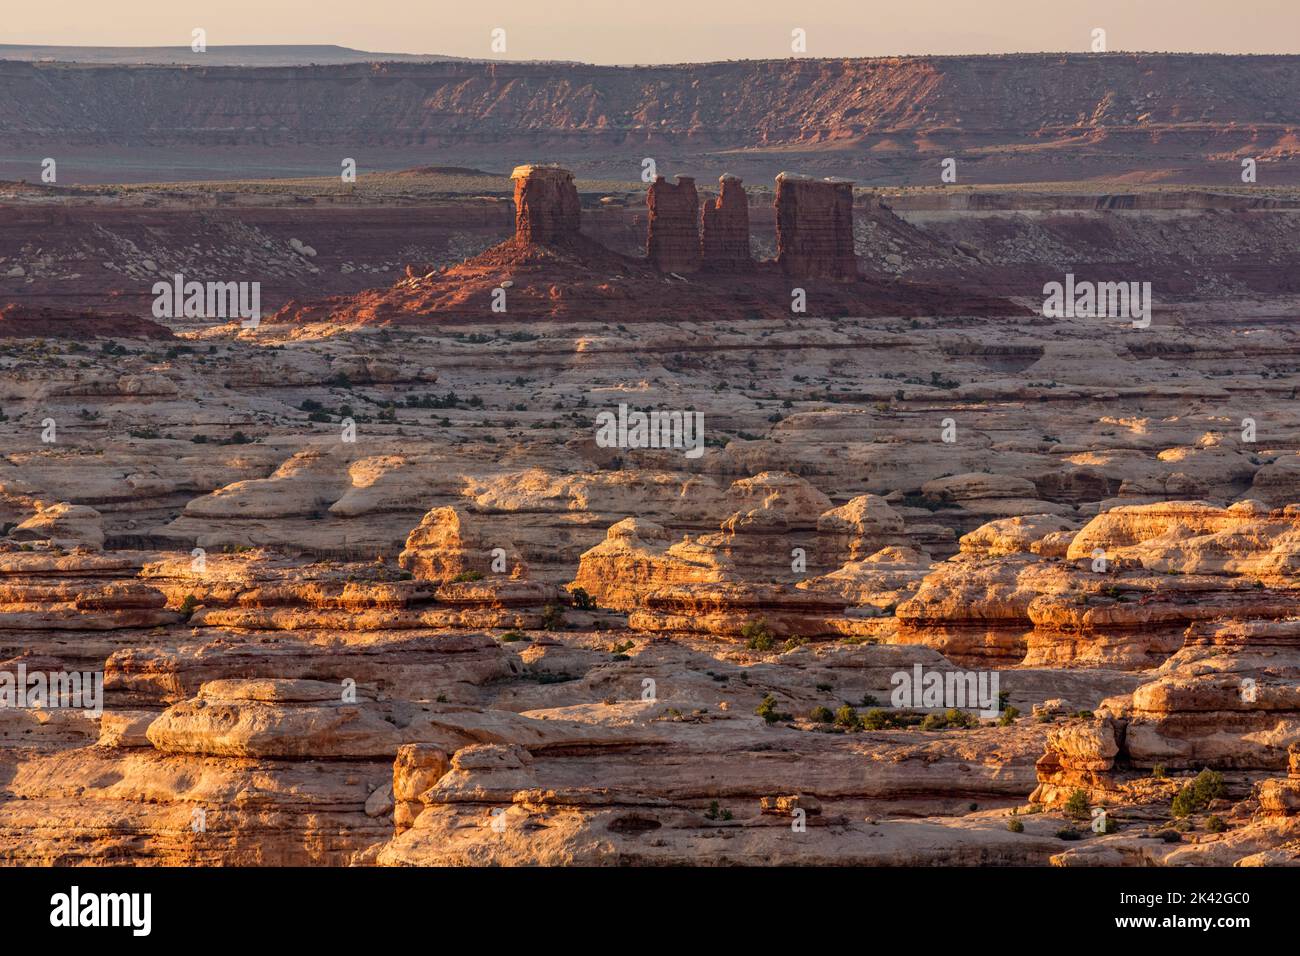 The Chocolate Drops & winding canyons in the Maze District of Canyonlands NP, Utah. Stock Photo